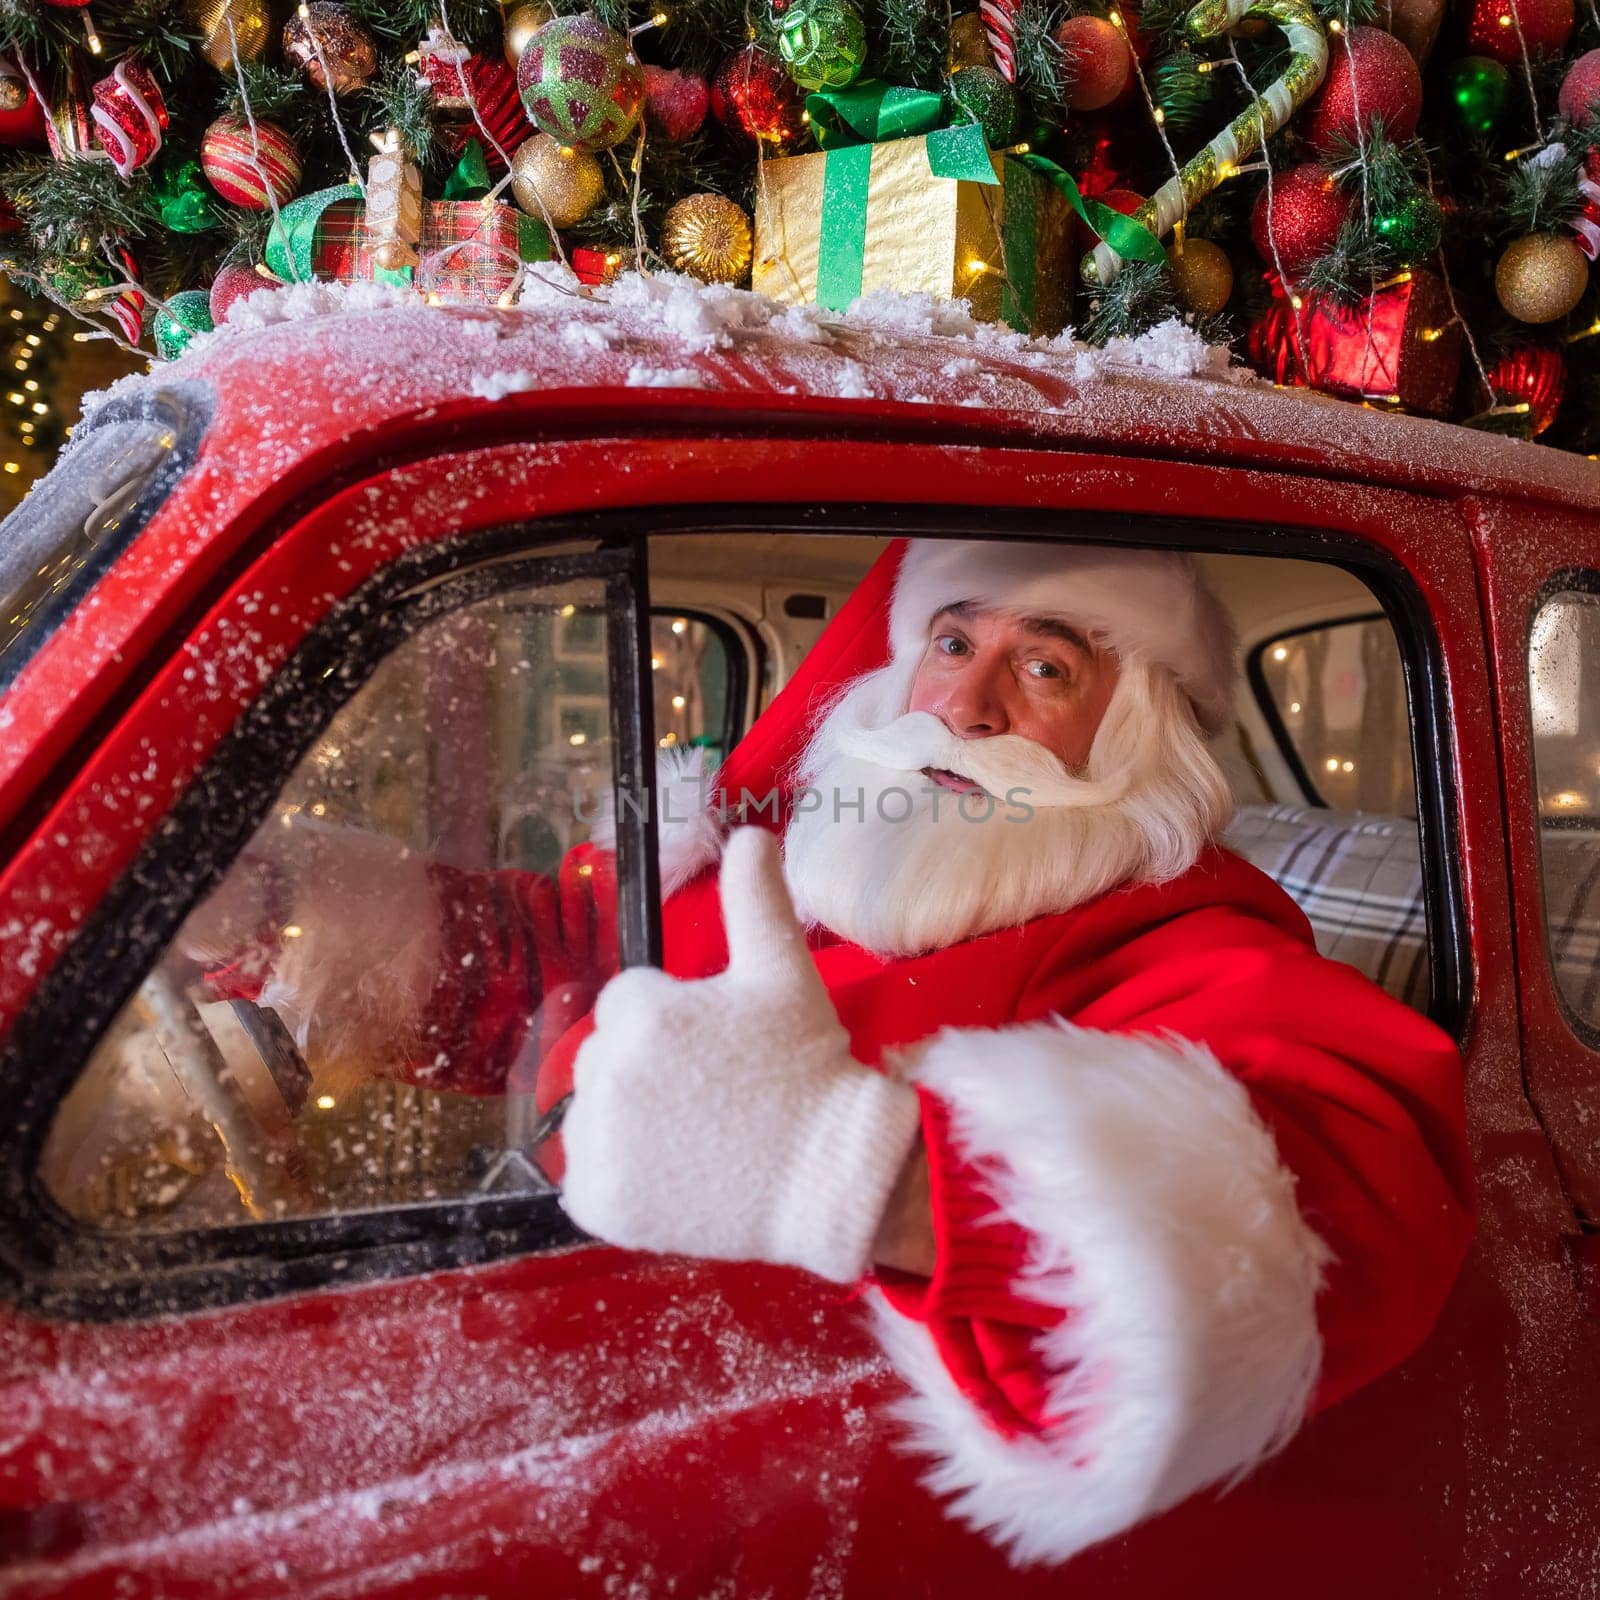 Portrait of Santa Claus driving a red car at Christmas and showing thumbs up. by mrwed54